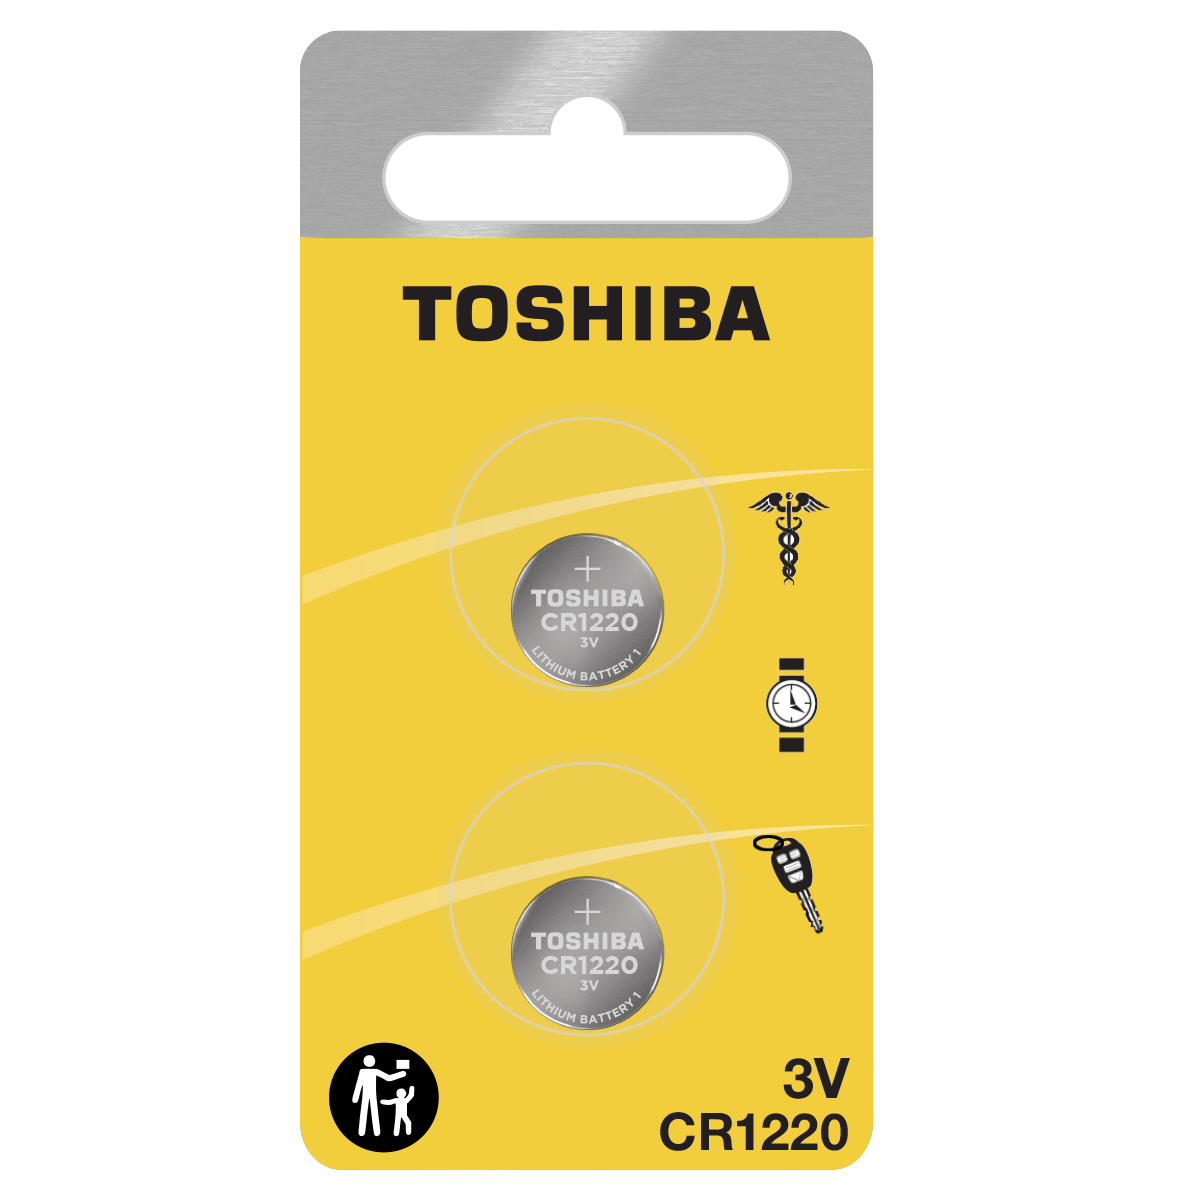    Toshiba CR1220 Battery 3V Lithium Coin Cell (2 PCS Child Resistant Blister Package) 